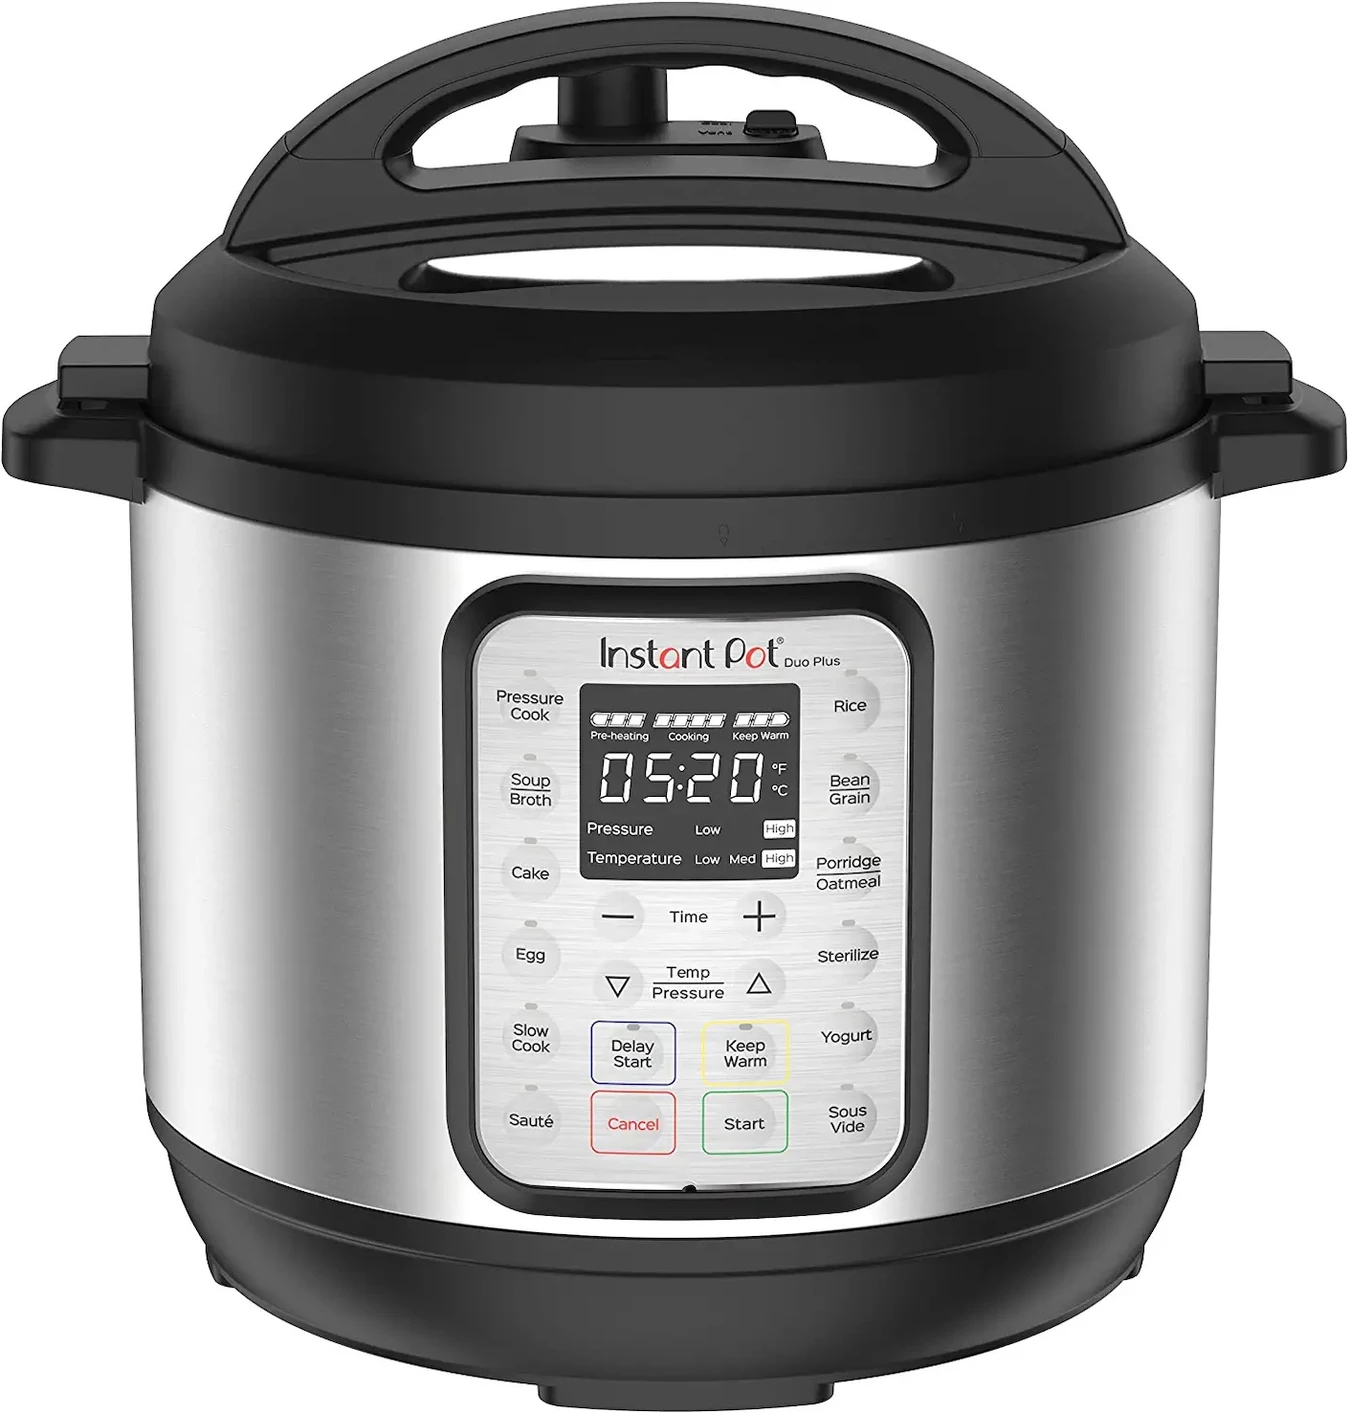 A metal instant pot with black accents and a light up display sits in front of a white background.